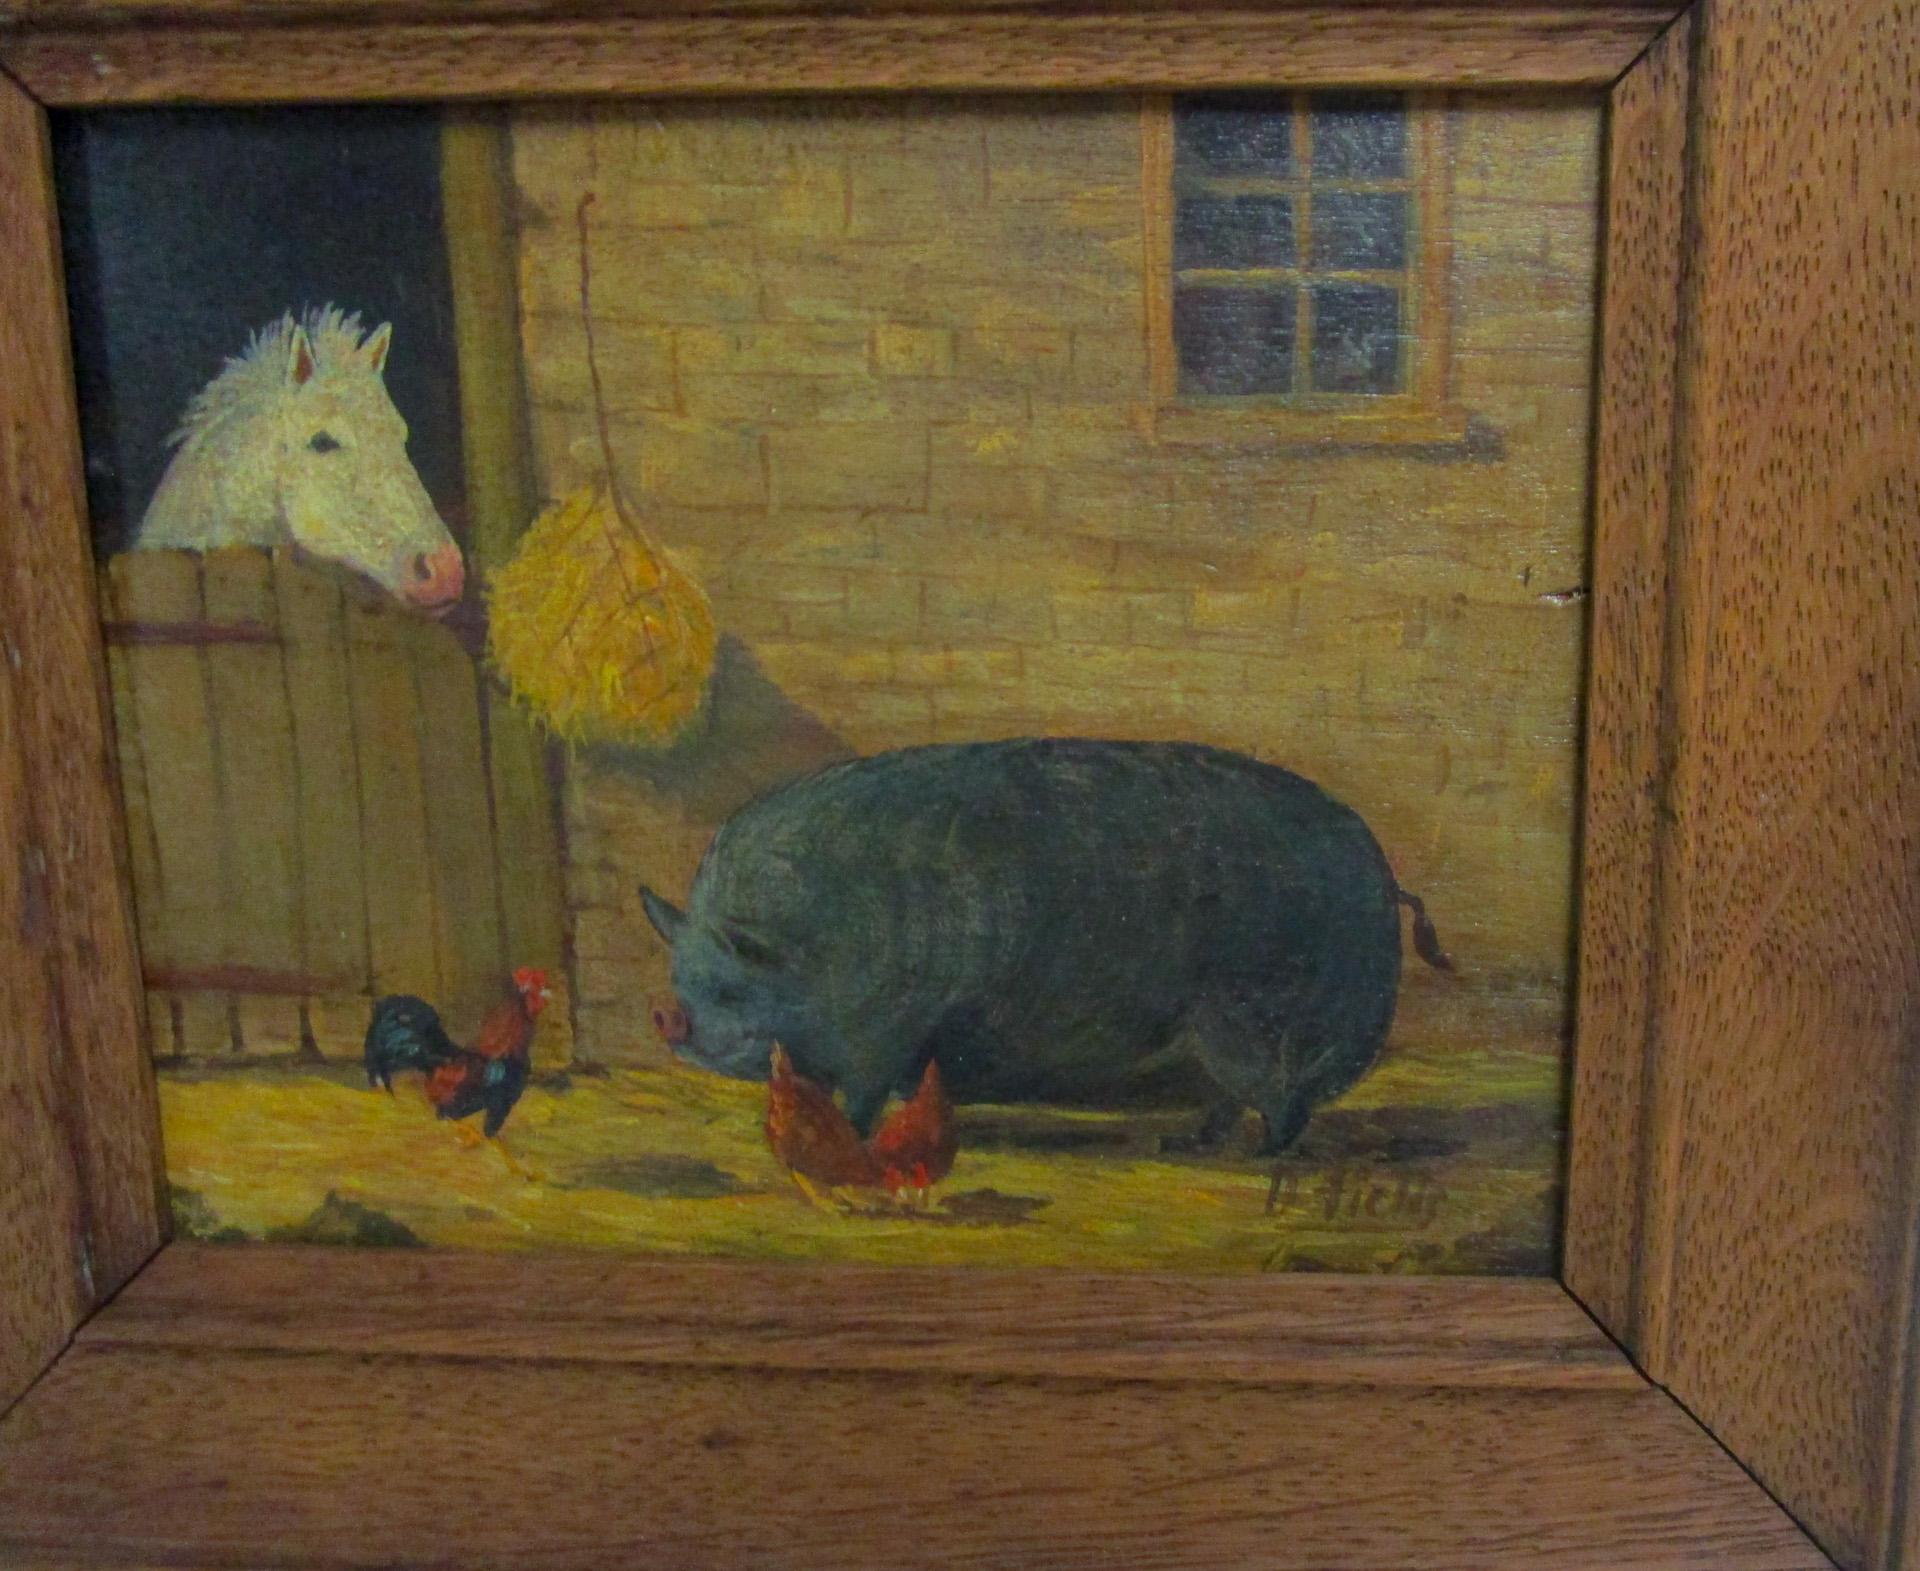 Painted Primitive English Original Oil Painting Barnyard Scene signed D'Fields